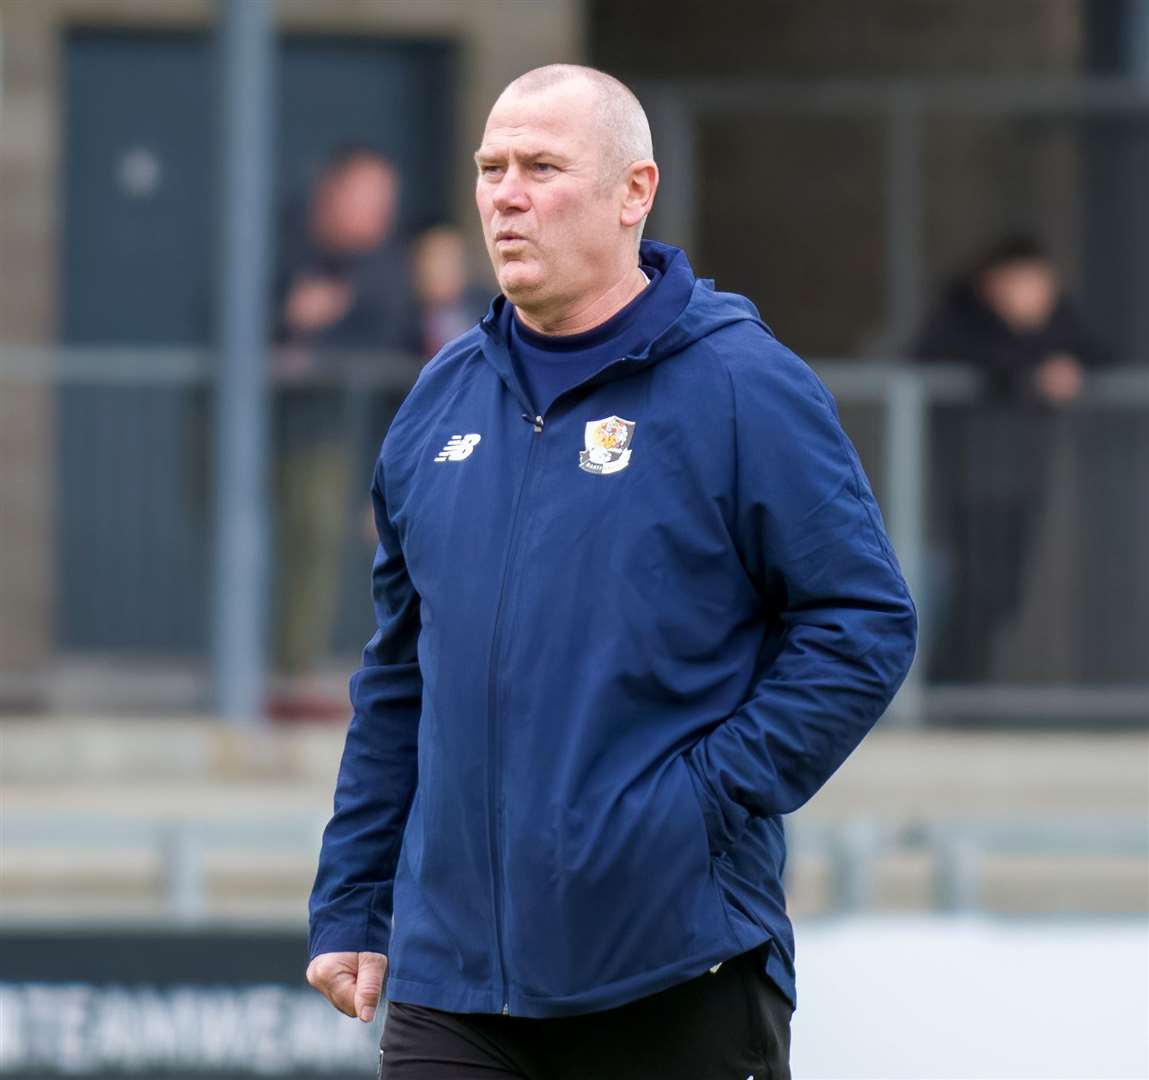 Dartford boss Alan Dowson was delighted with his players’ work-rate at Worthing